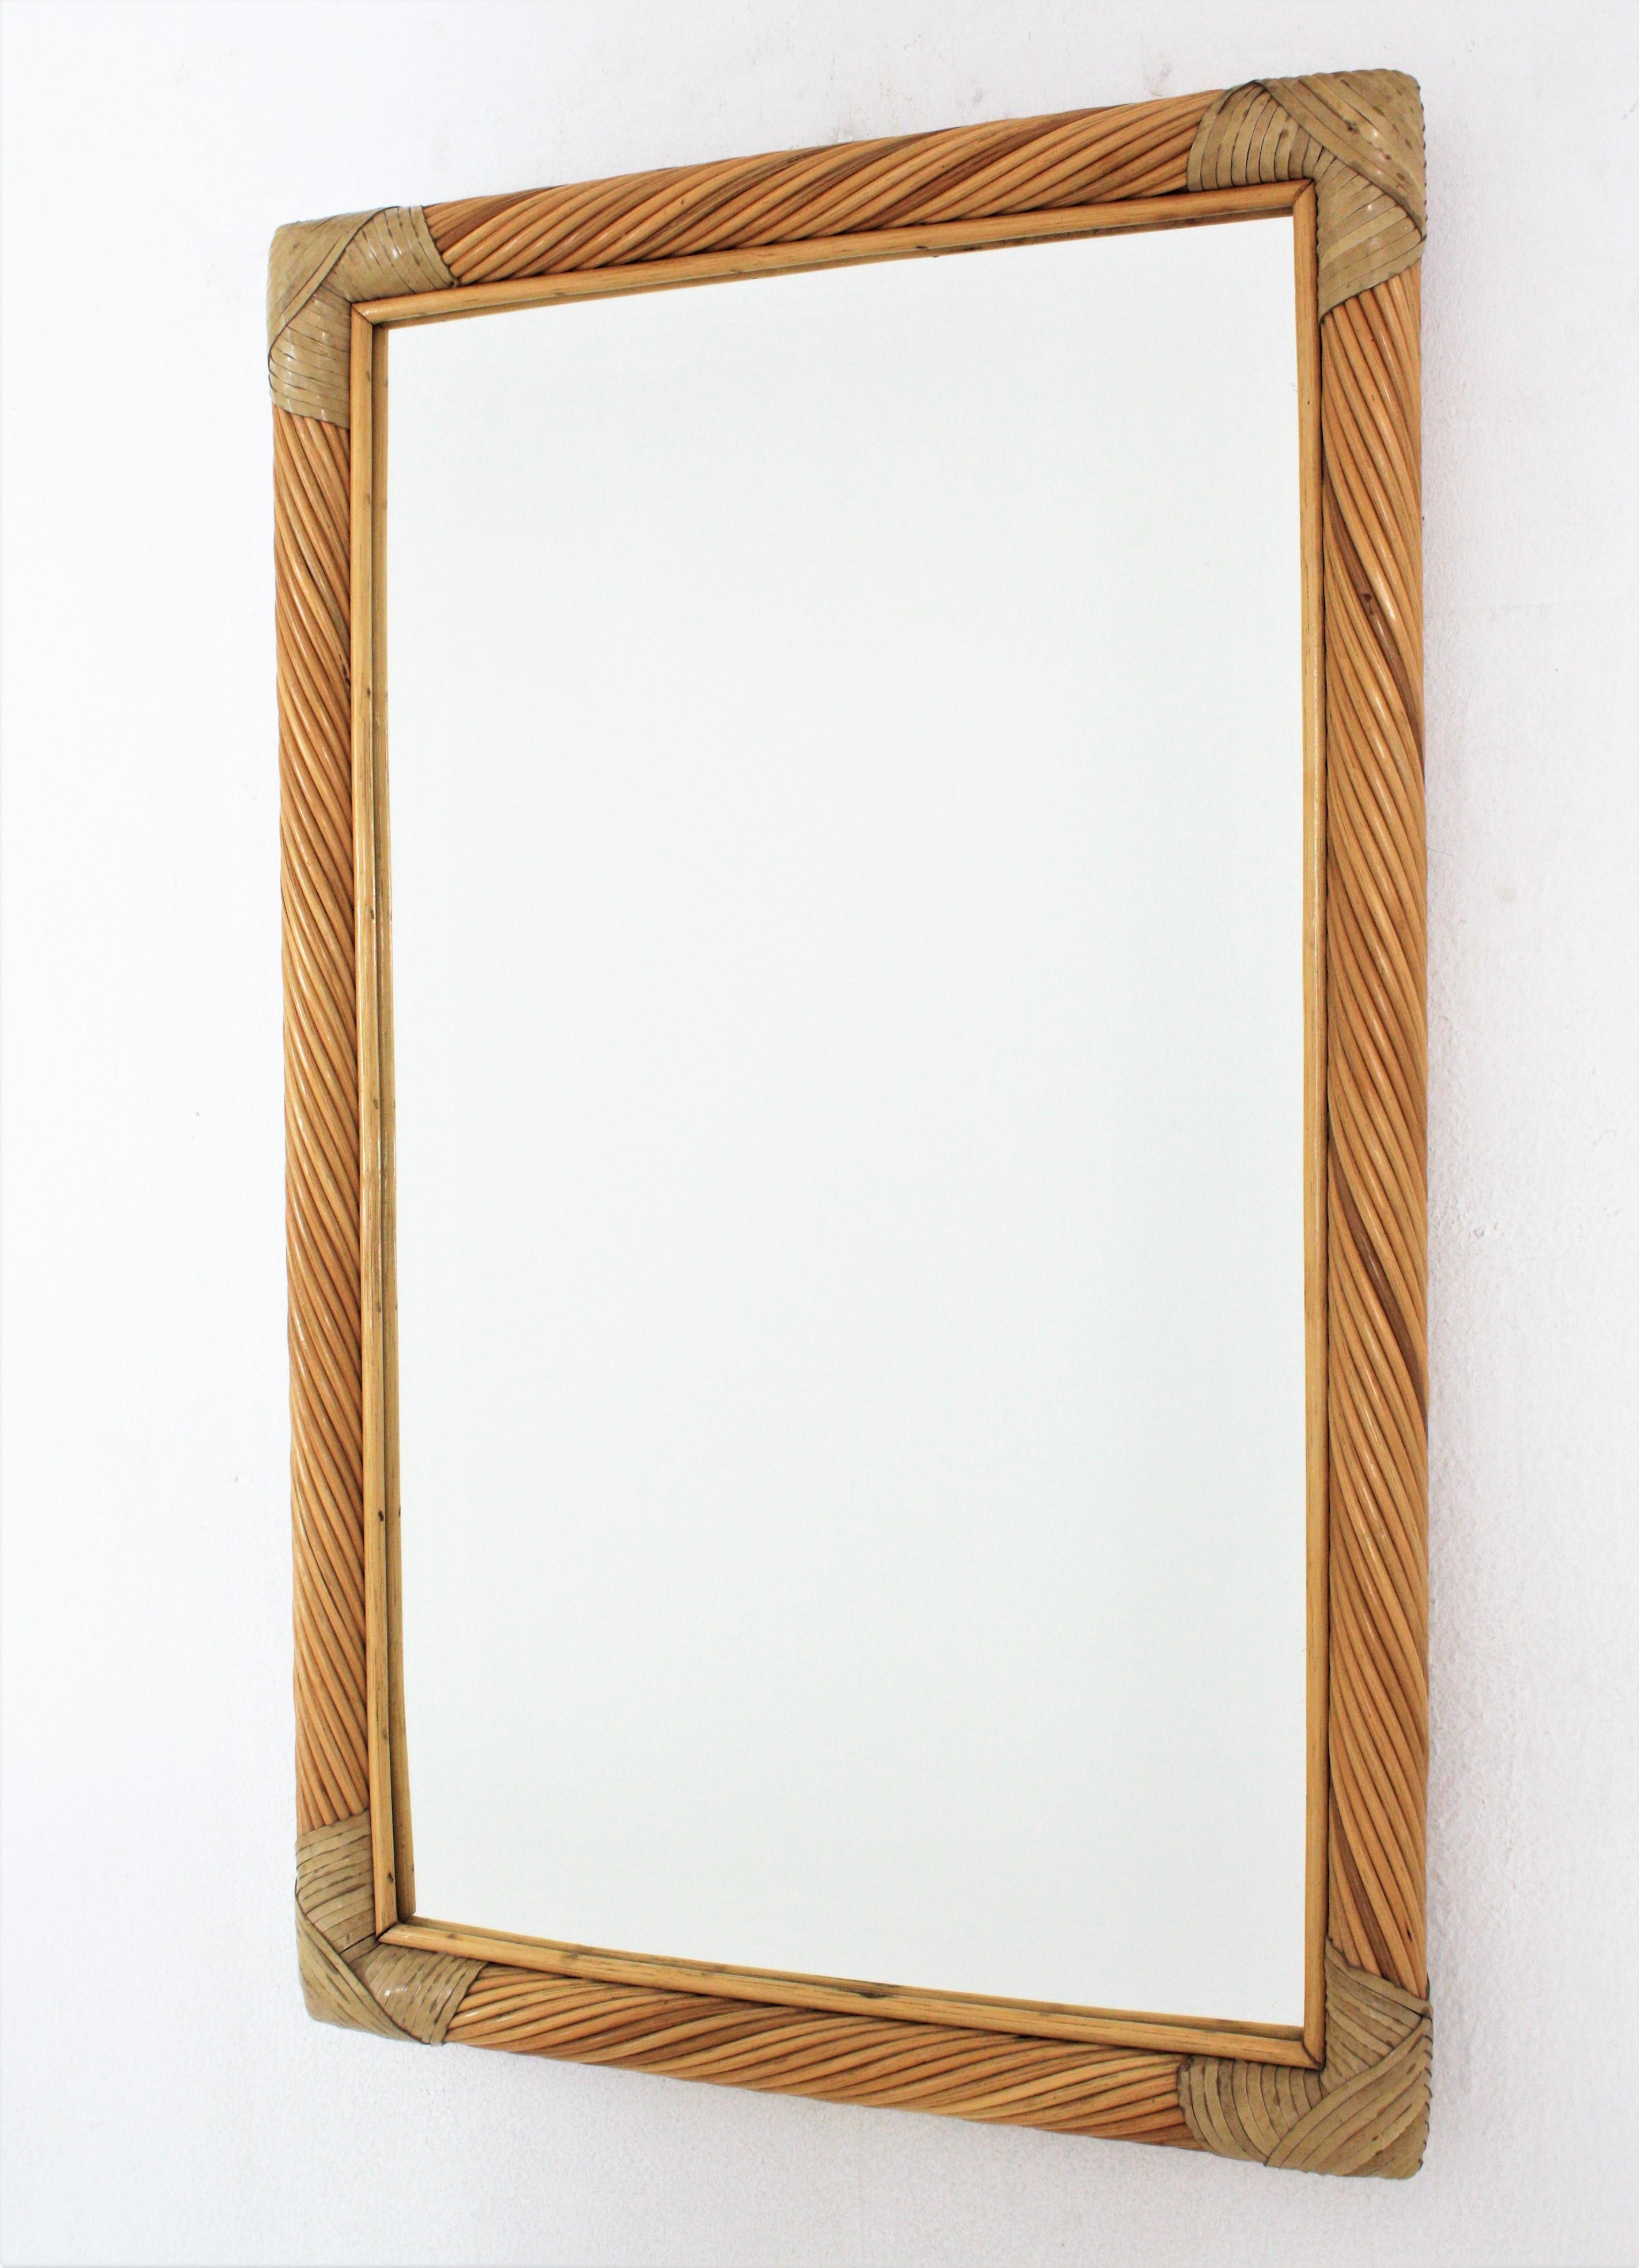 Cane Rattan Pencil Reed Rectangular Mirror For Sale